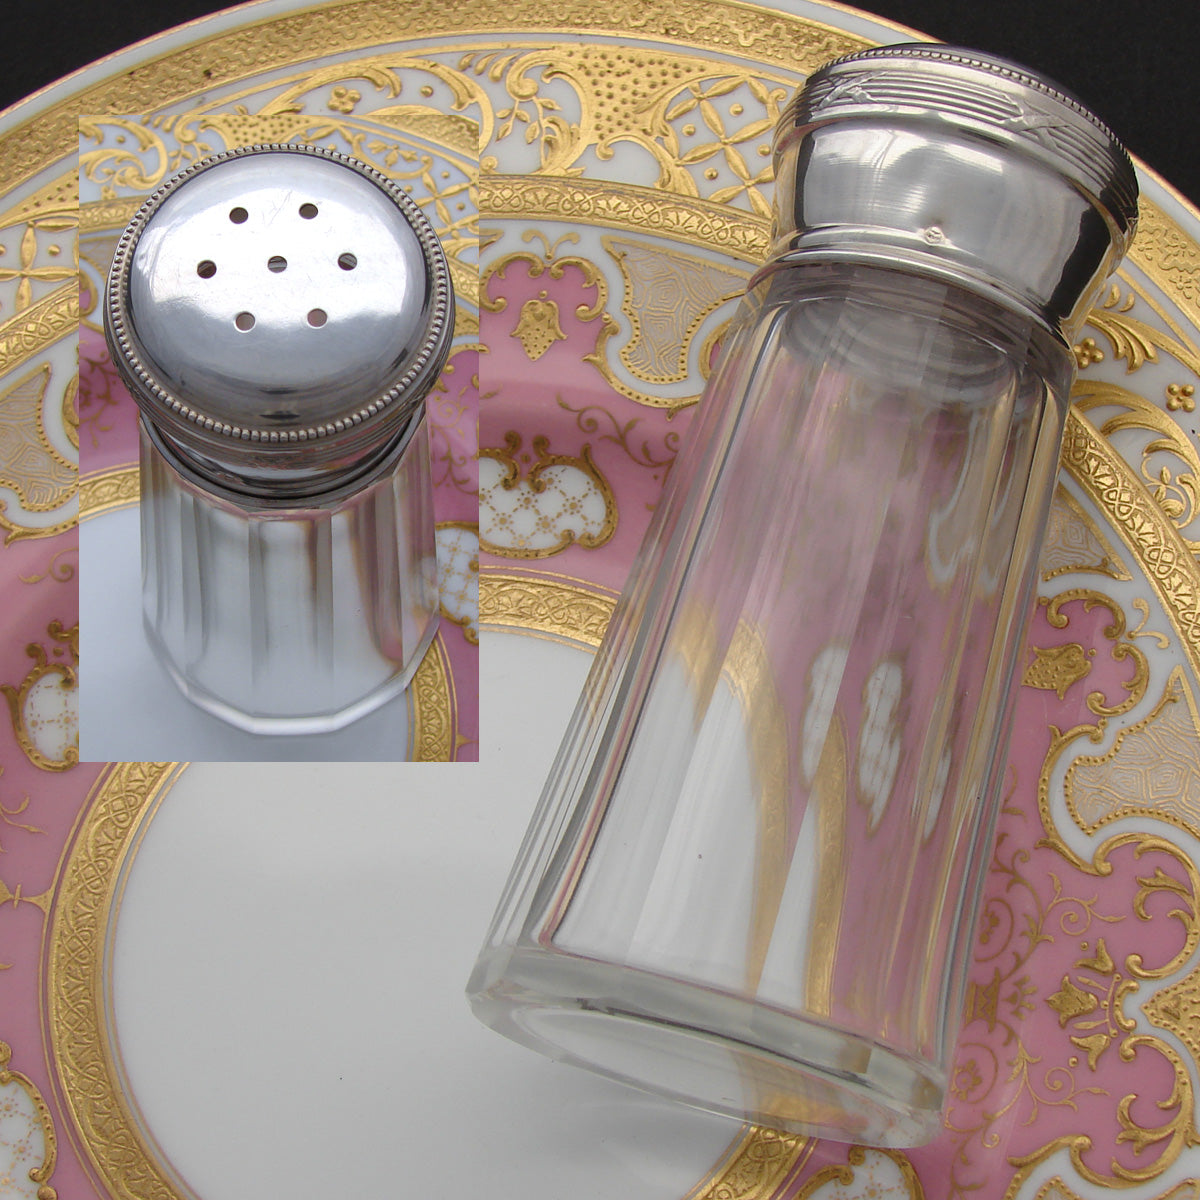 Fine Vintage French Sterling Silver & Cut Glass 5.25” Sugar Shaker, Sifter, Muffineer